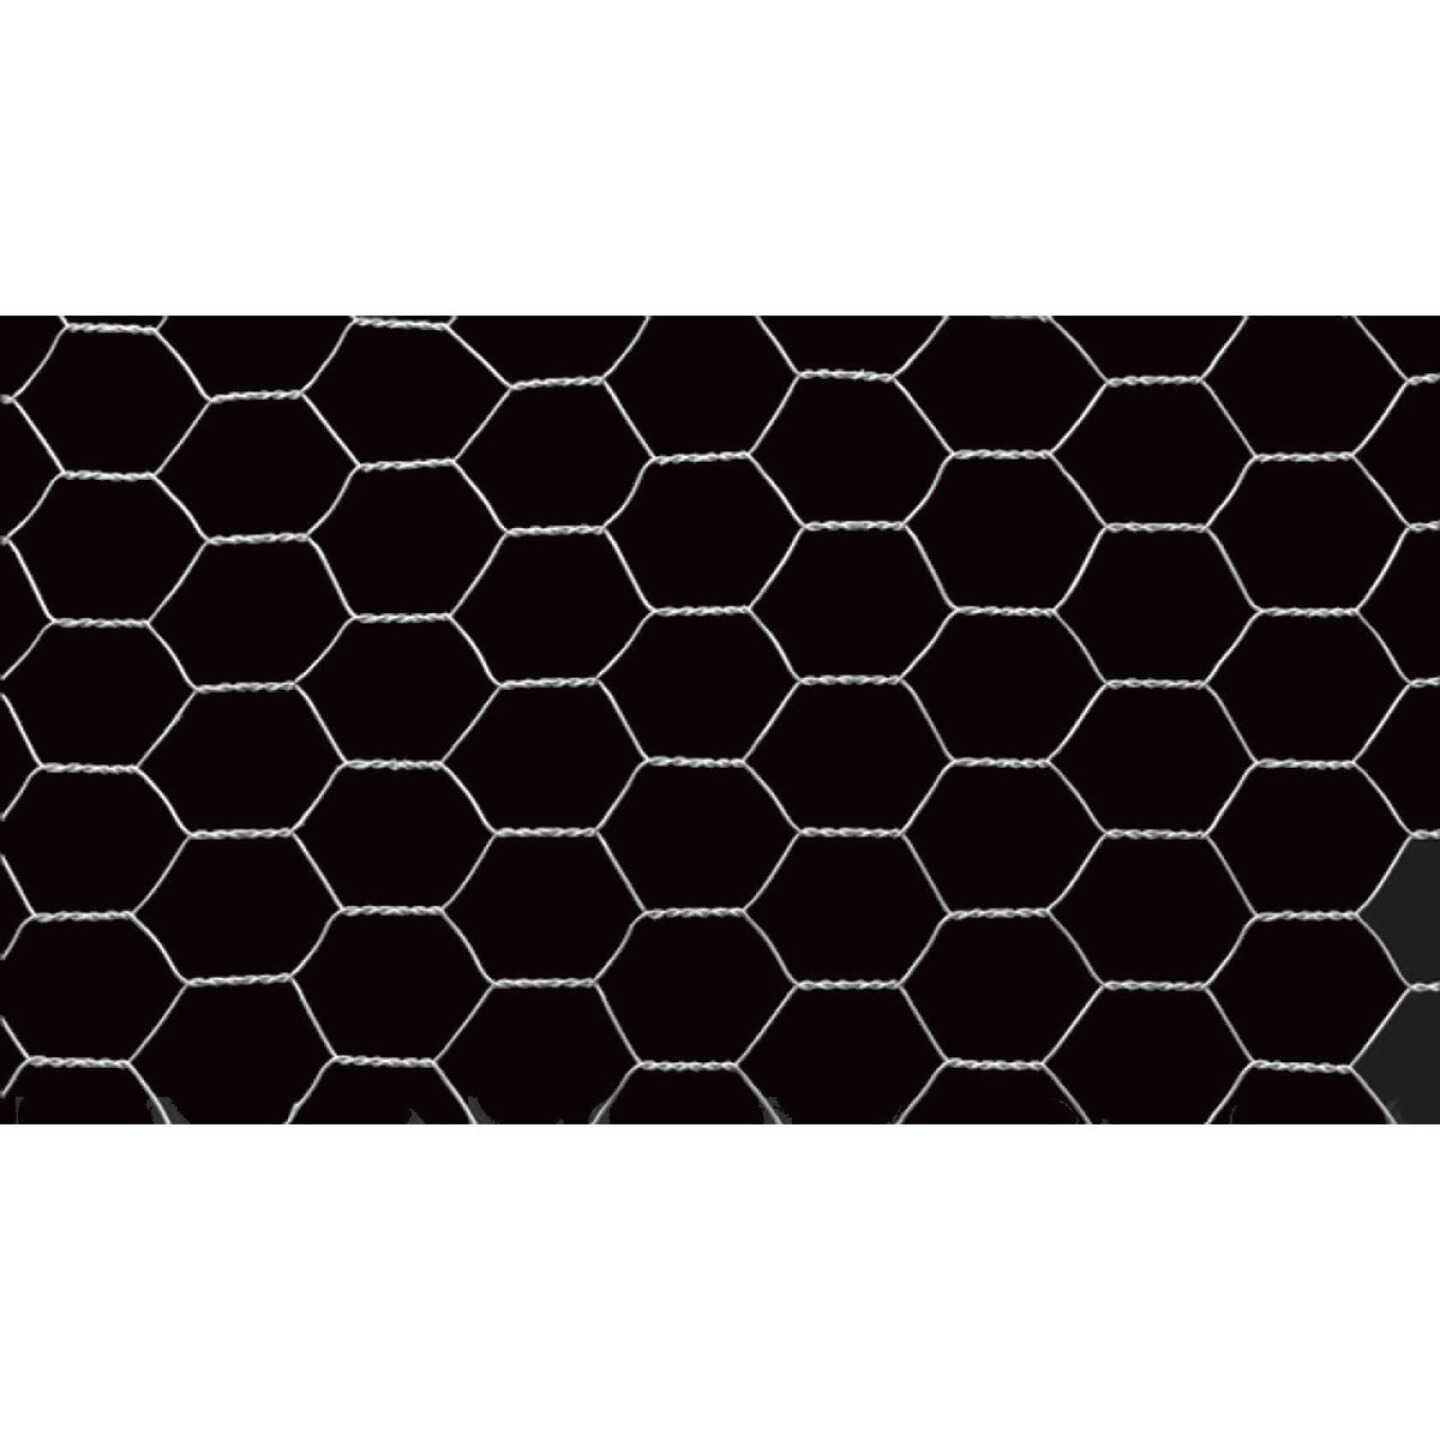 Do it 1 In. x 18 In. H. x 150 Ft. L. Hexagonal Wire Poultry Netting Image 3